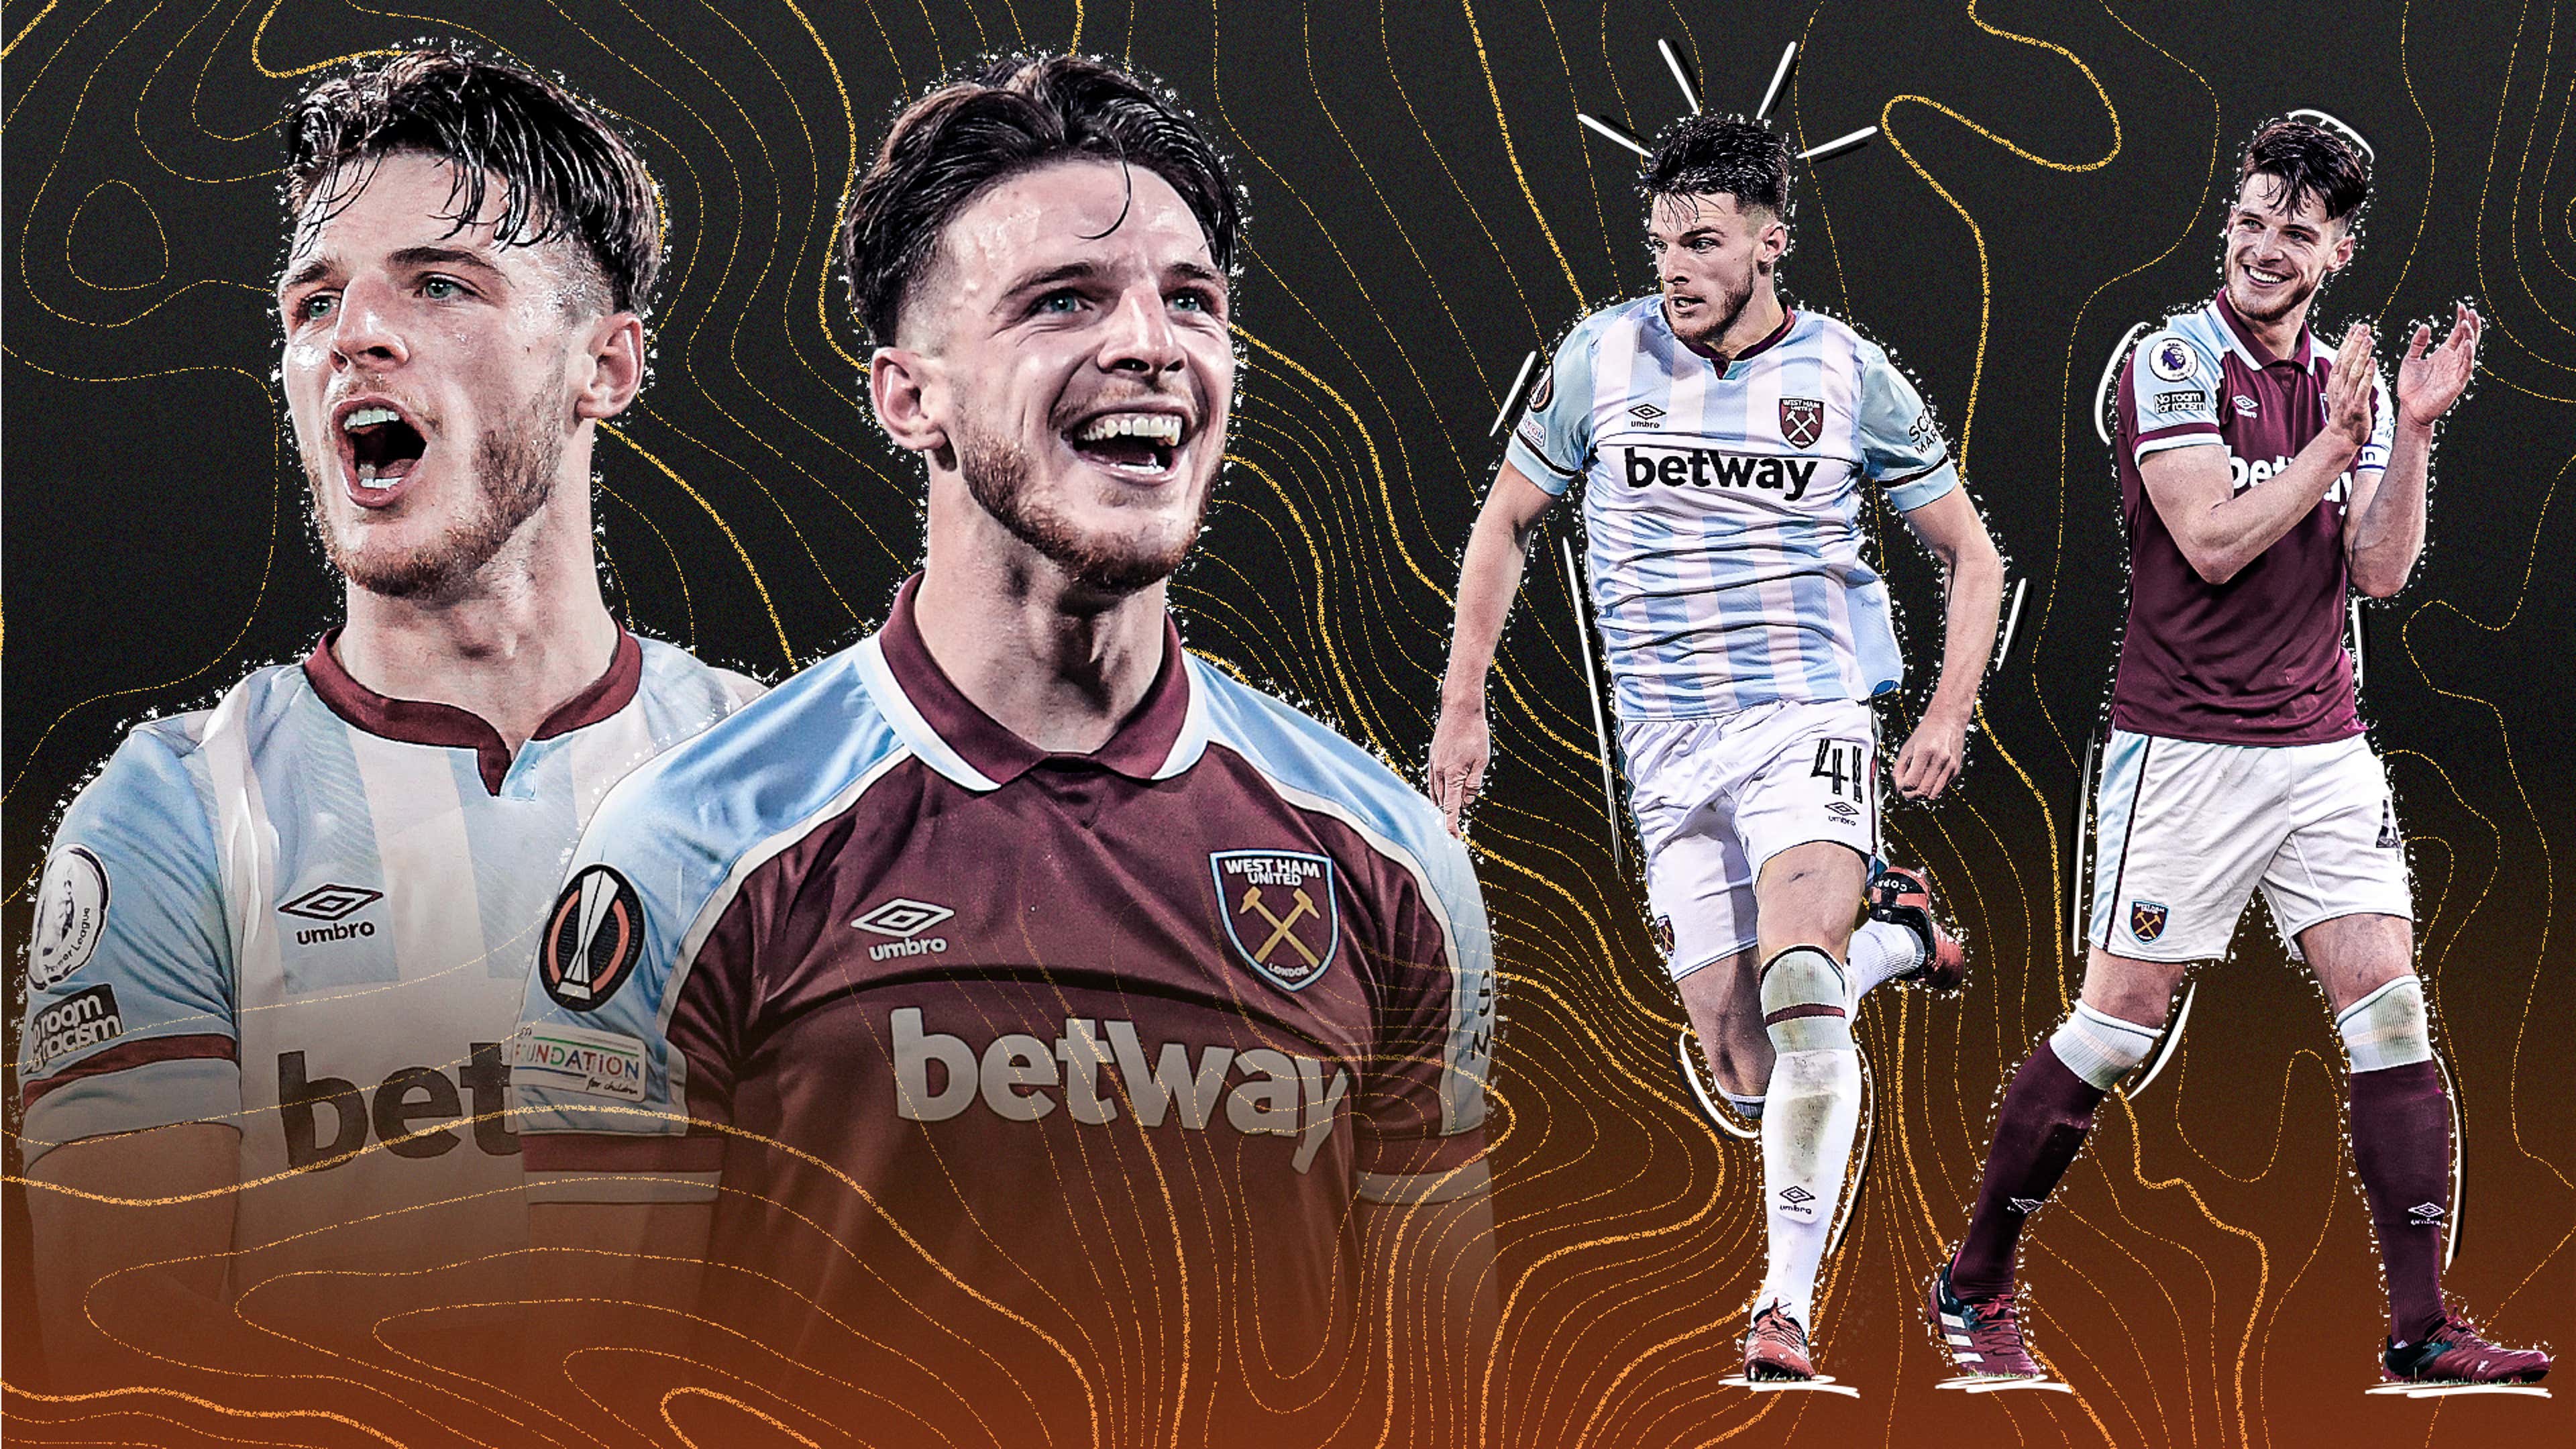 West Ham Are Flying High With a Unique Brand of Counter-Attacking Football